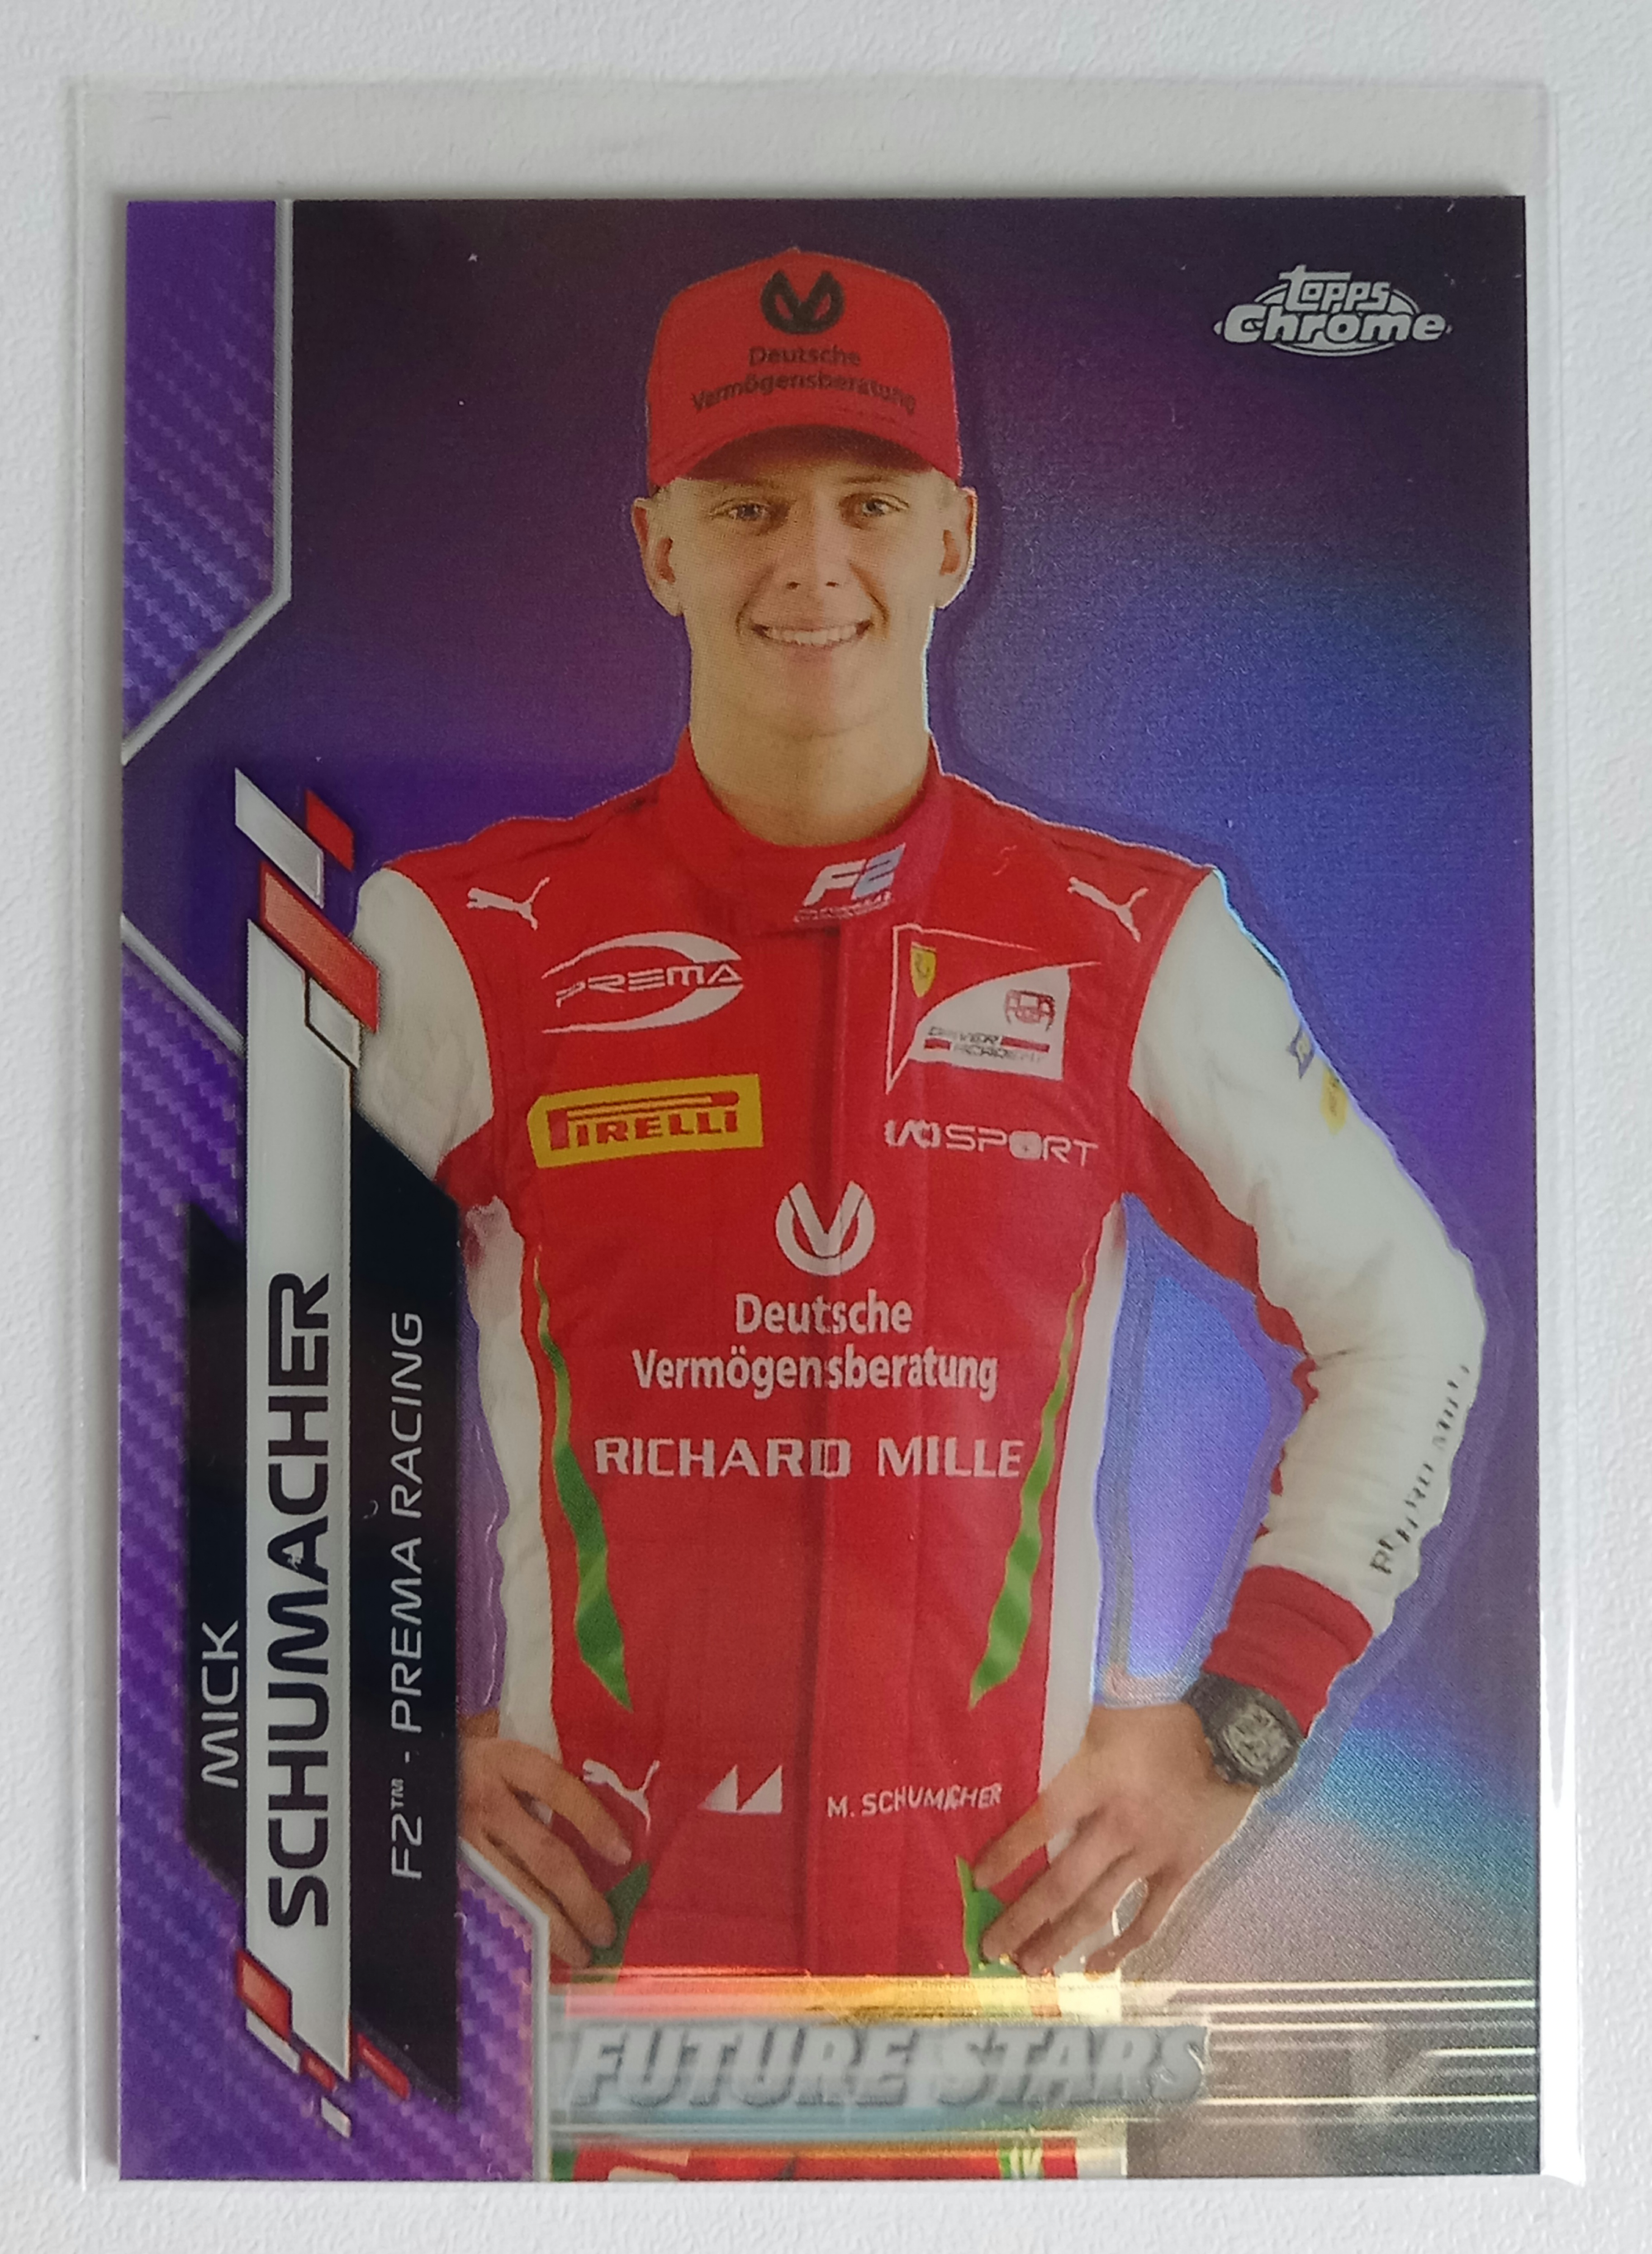 Why now may be a good time to buy Mick Schumacher cards